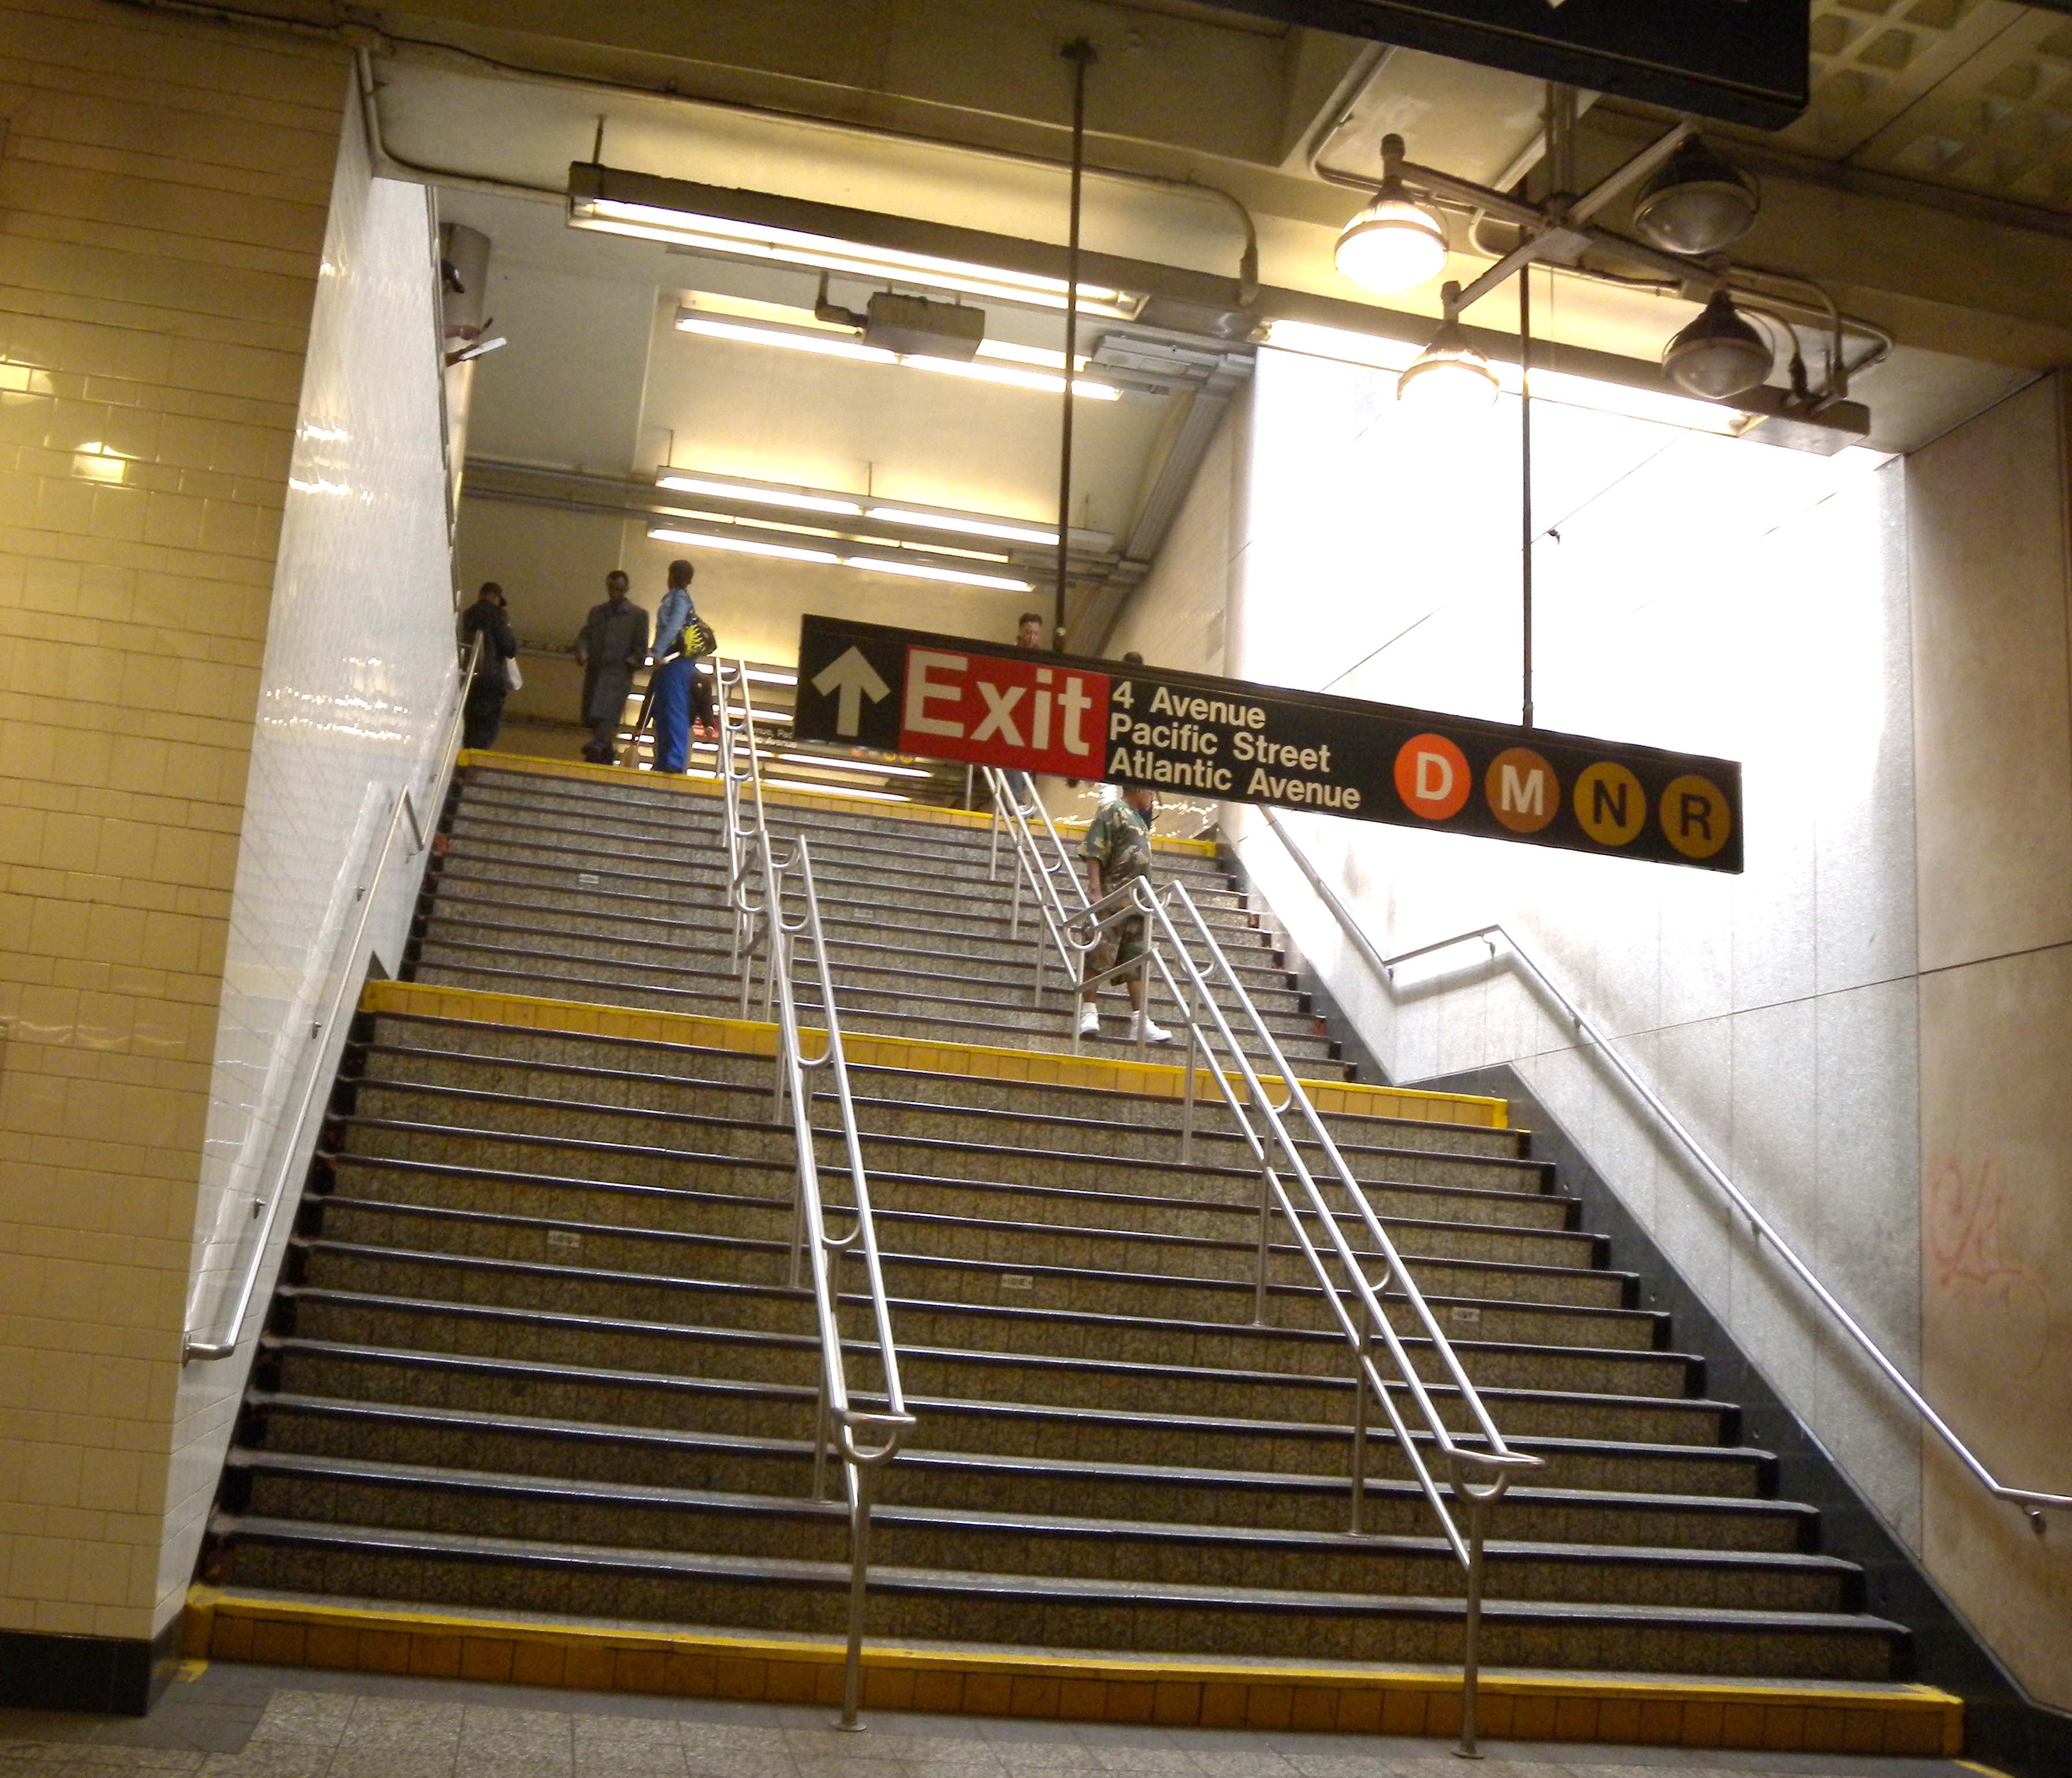 The New York City subway can be daunting for disabled and elderly passengers.